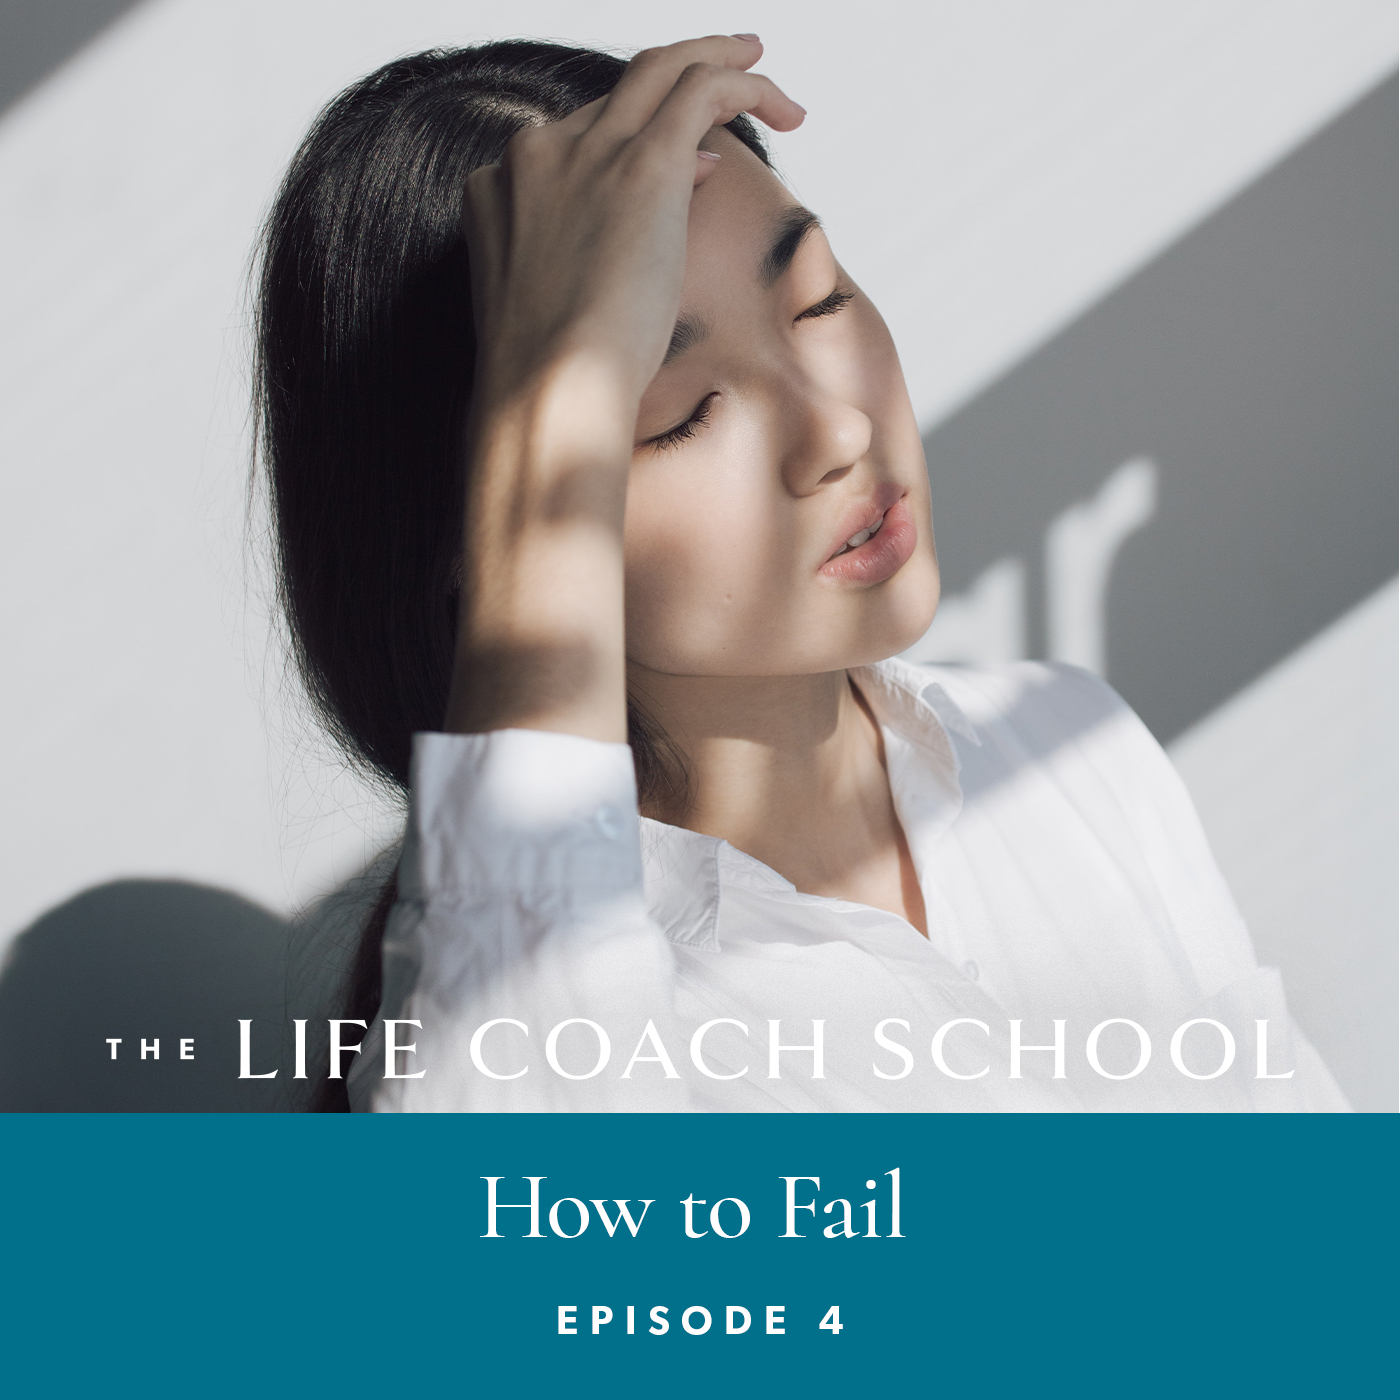 The Life Coach School Podcast with Brooke Castillo | Episode 4 | Why How to Fail